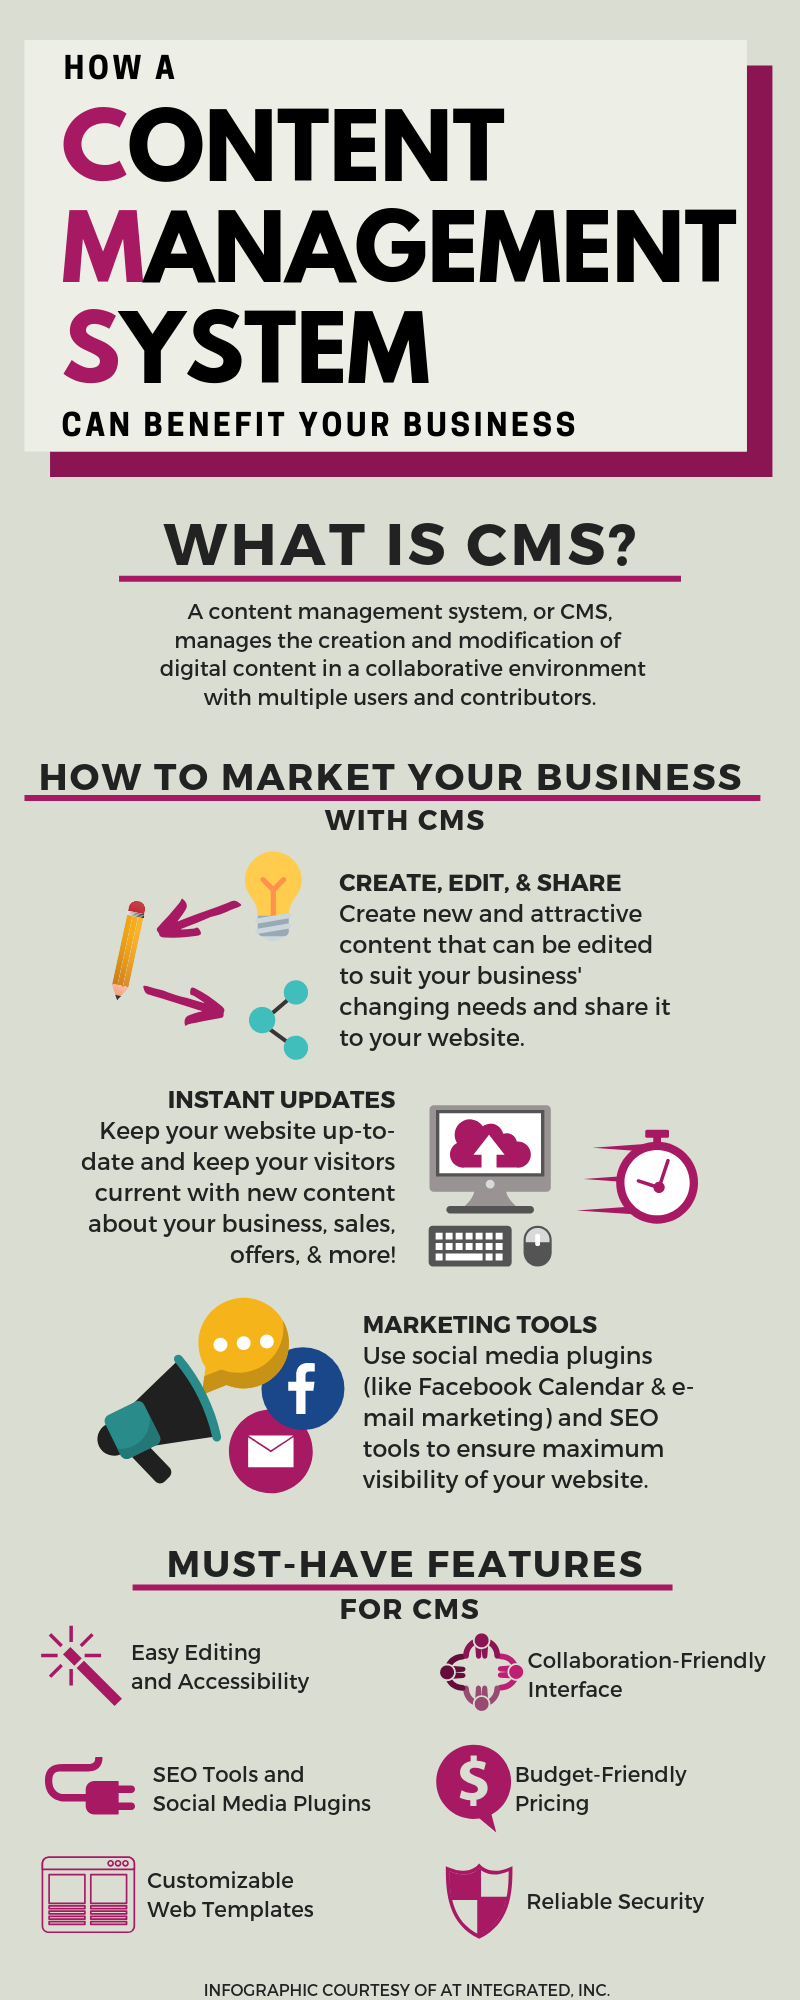 How a Content Management System Can Help You Market Your Business